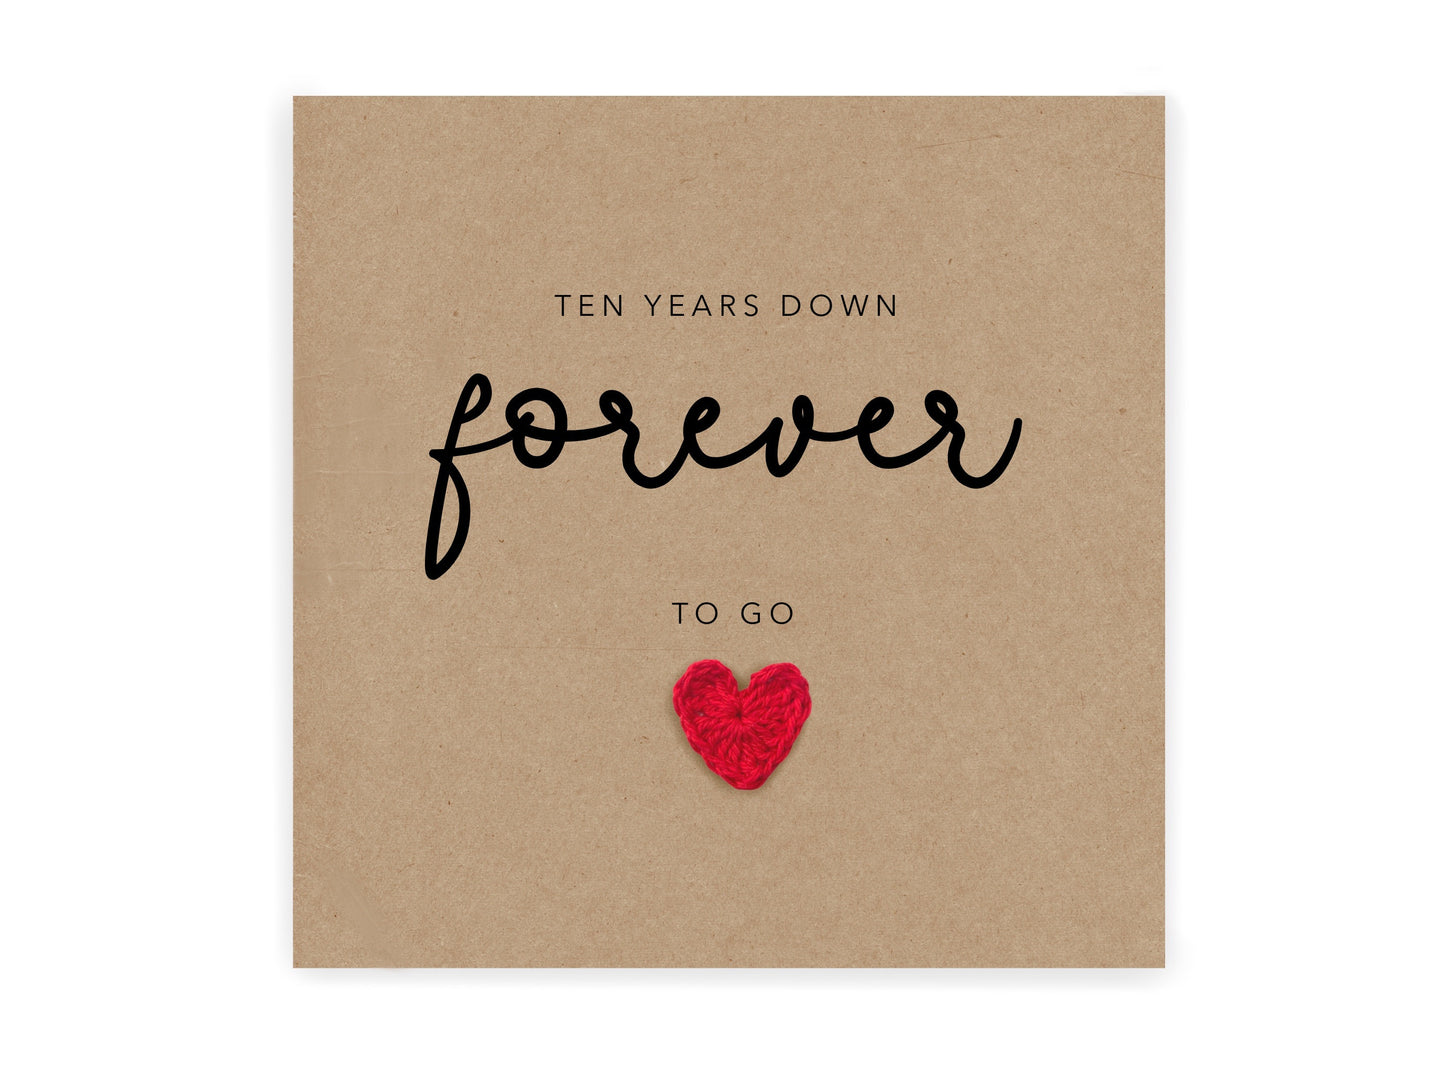 Tenth 10th Wedding Anniversary Simple Rustic Ten Year Anniversary,Card for Husband Wife, 10 Years down forever to go, Anniversary Wedding